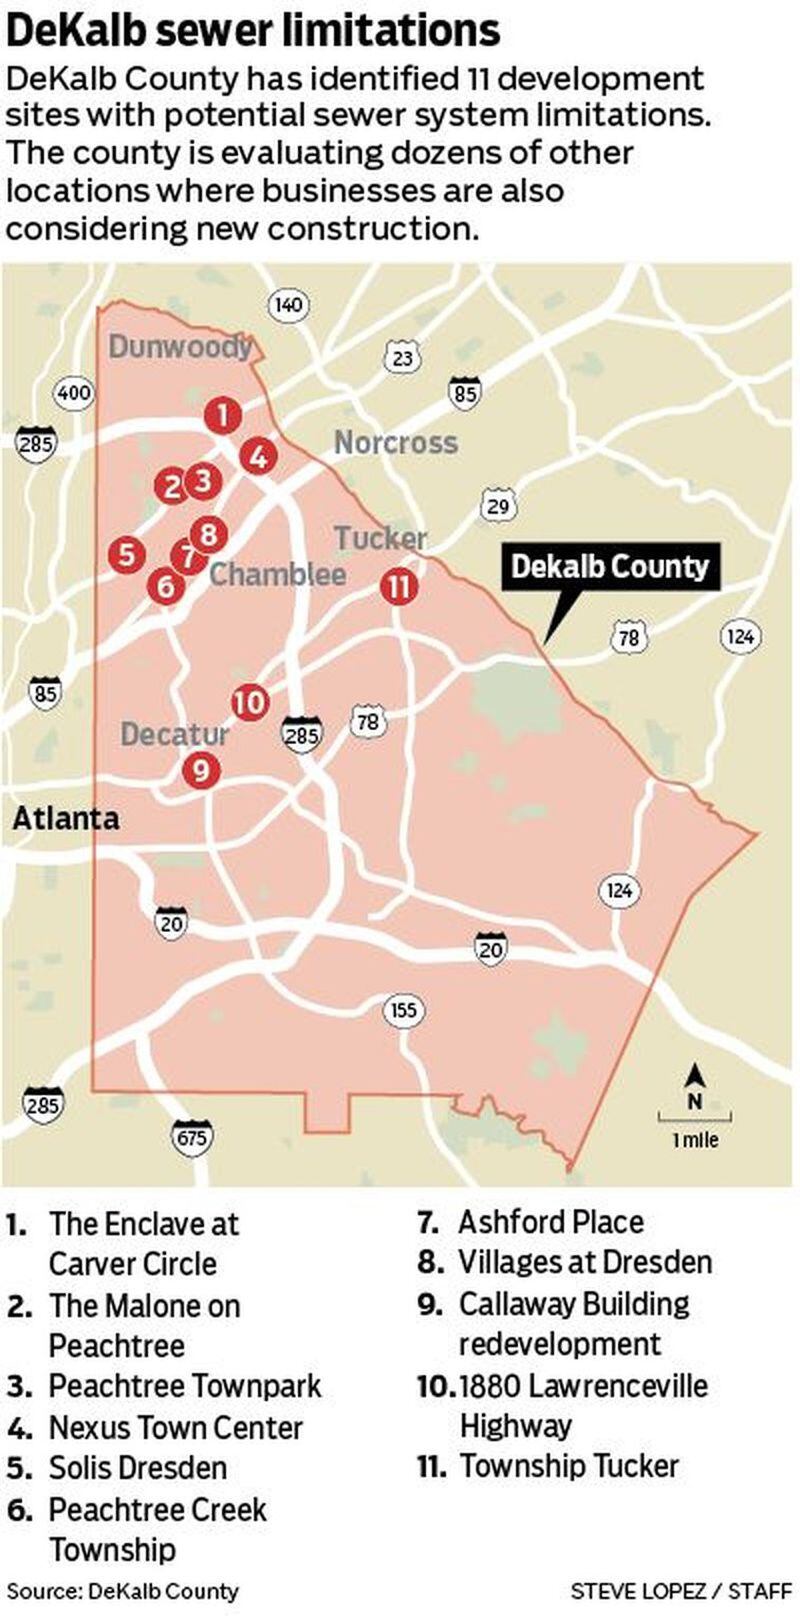 DeKalb County’s government has identified 11 sites where it may lack enough sewer capacity to handle the load of planned development. The government is evaluating whether its sewer system can accommodate development at more than 60 other locations.